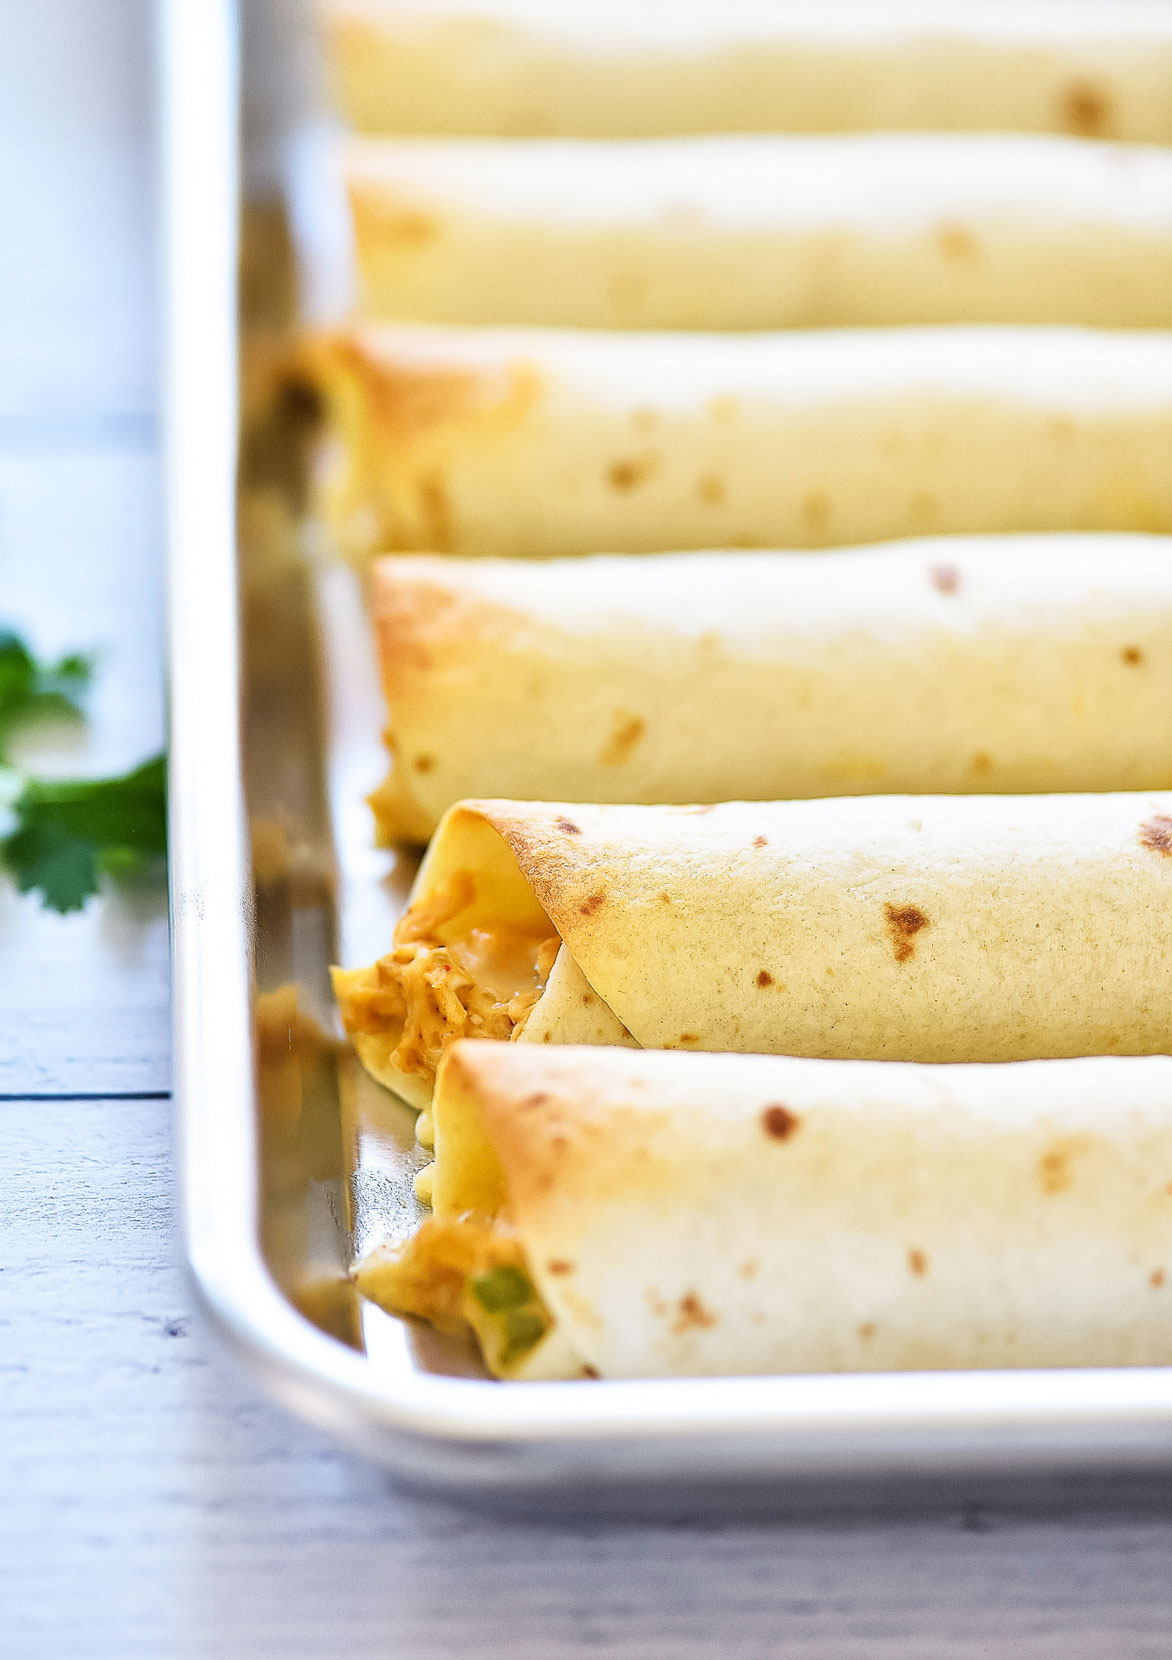 Baked Chicken Taquitos are a crispy flour tortilla wrapped around a warm center of creamy and cheesy Mexican chicken. Life-in-the-Lofthouse.com